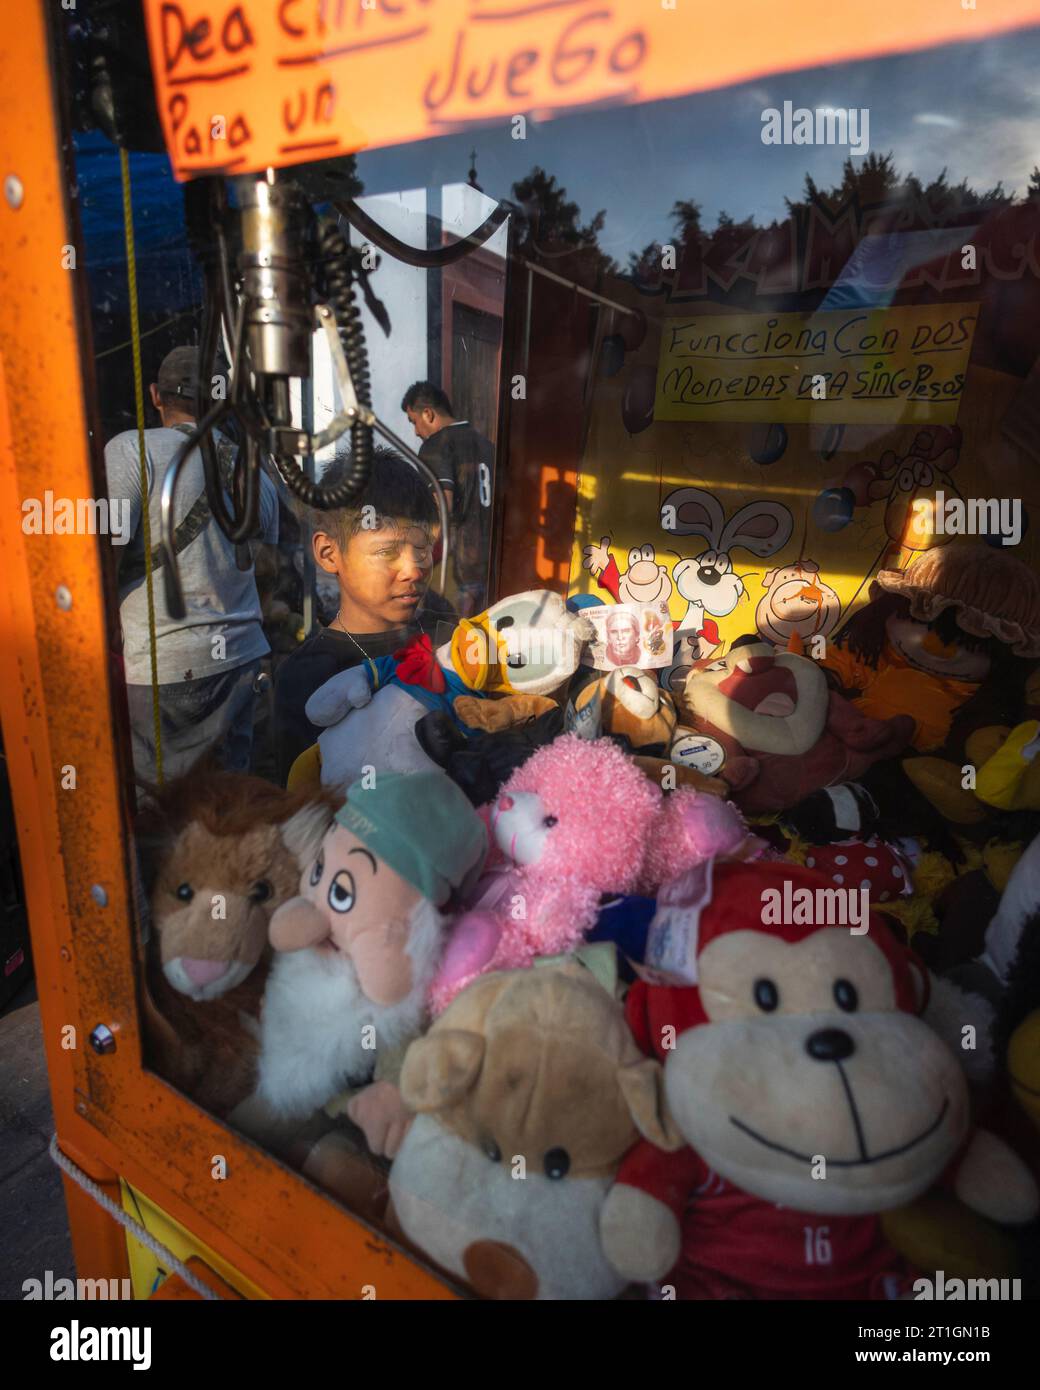 Boy looks yearningly at a 50 peso bill and stuffed animals to be won at the Jala, Nayarit fair in Mexico. Stock Photo